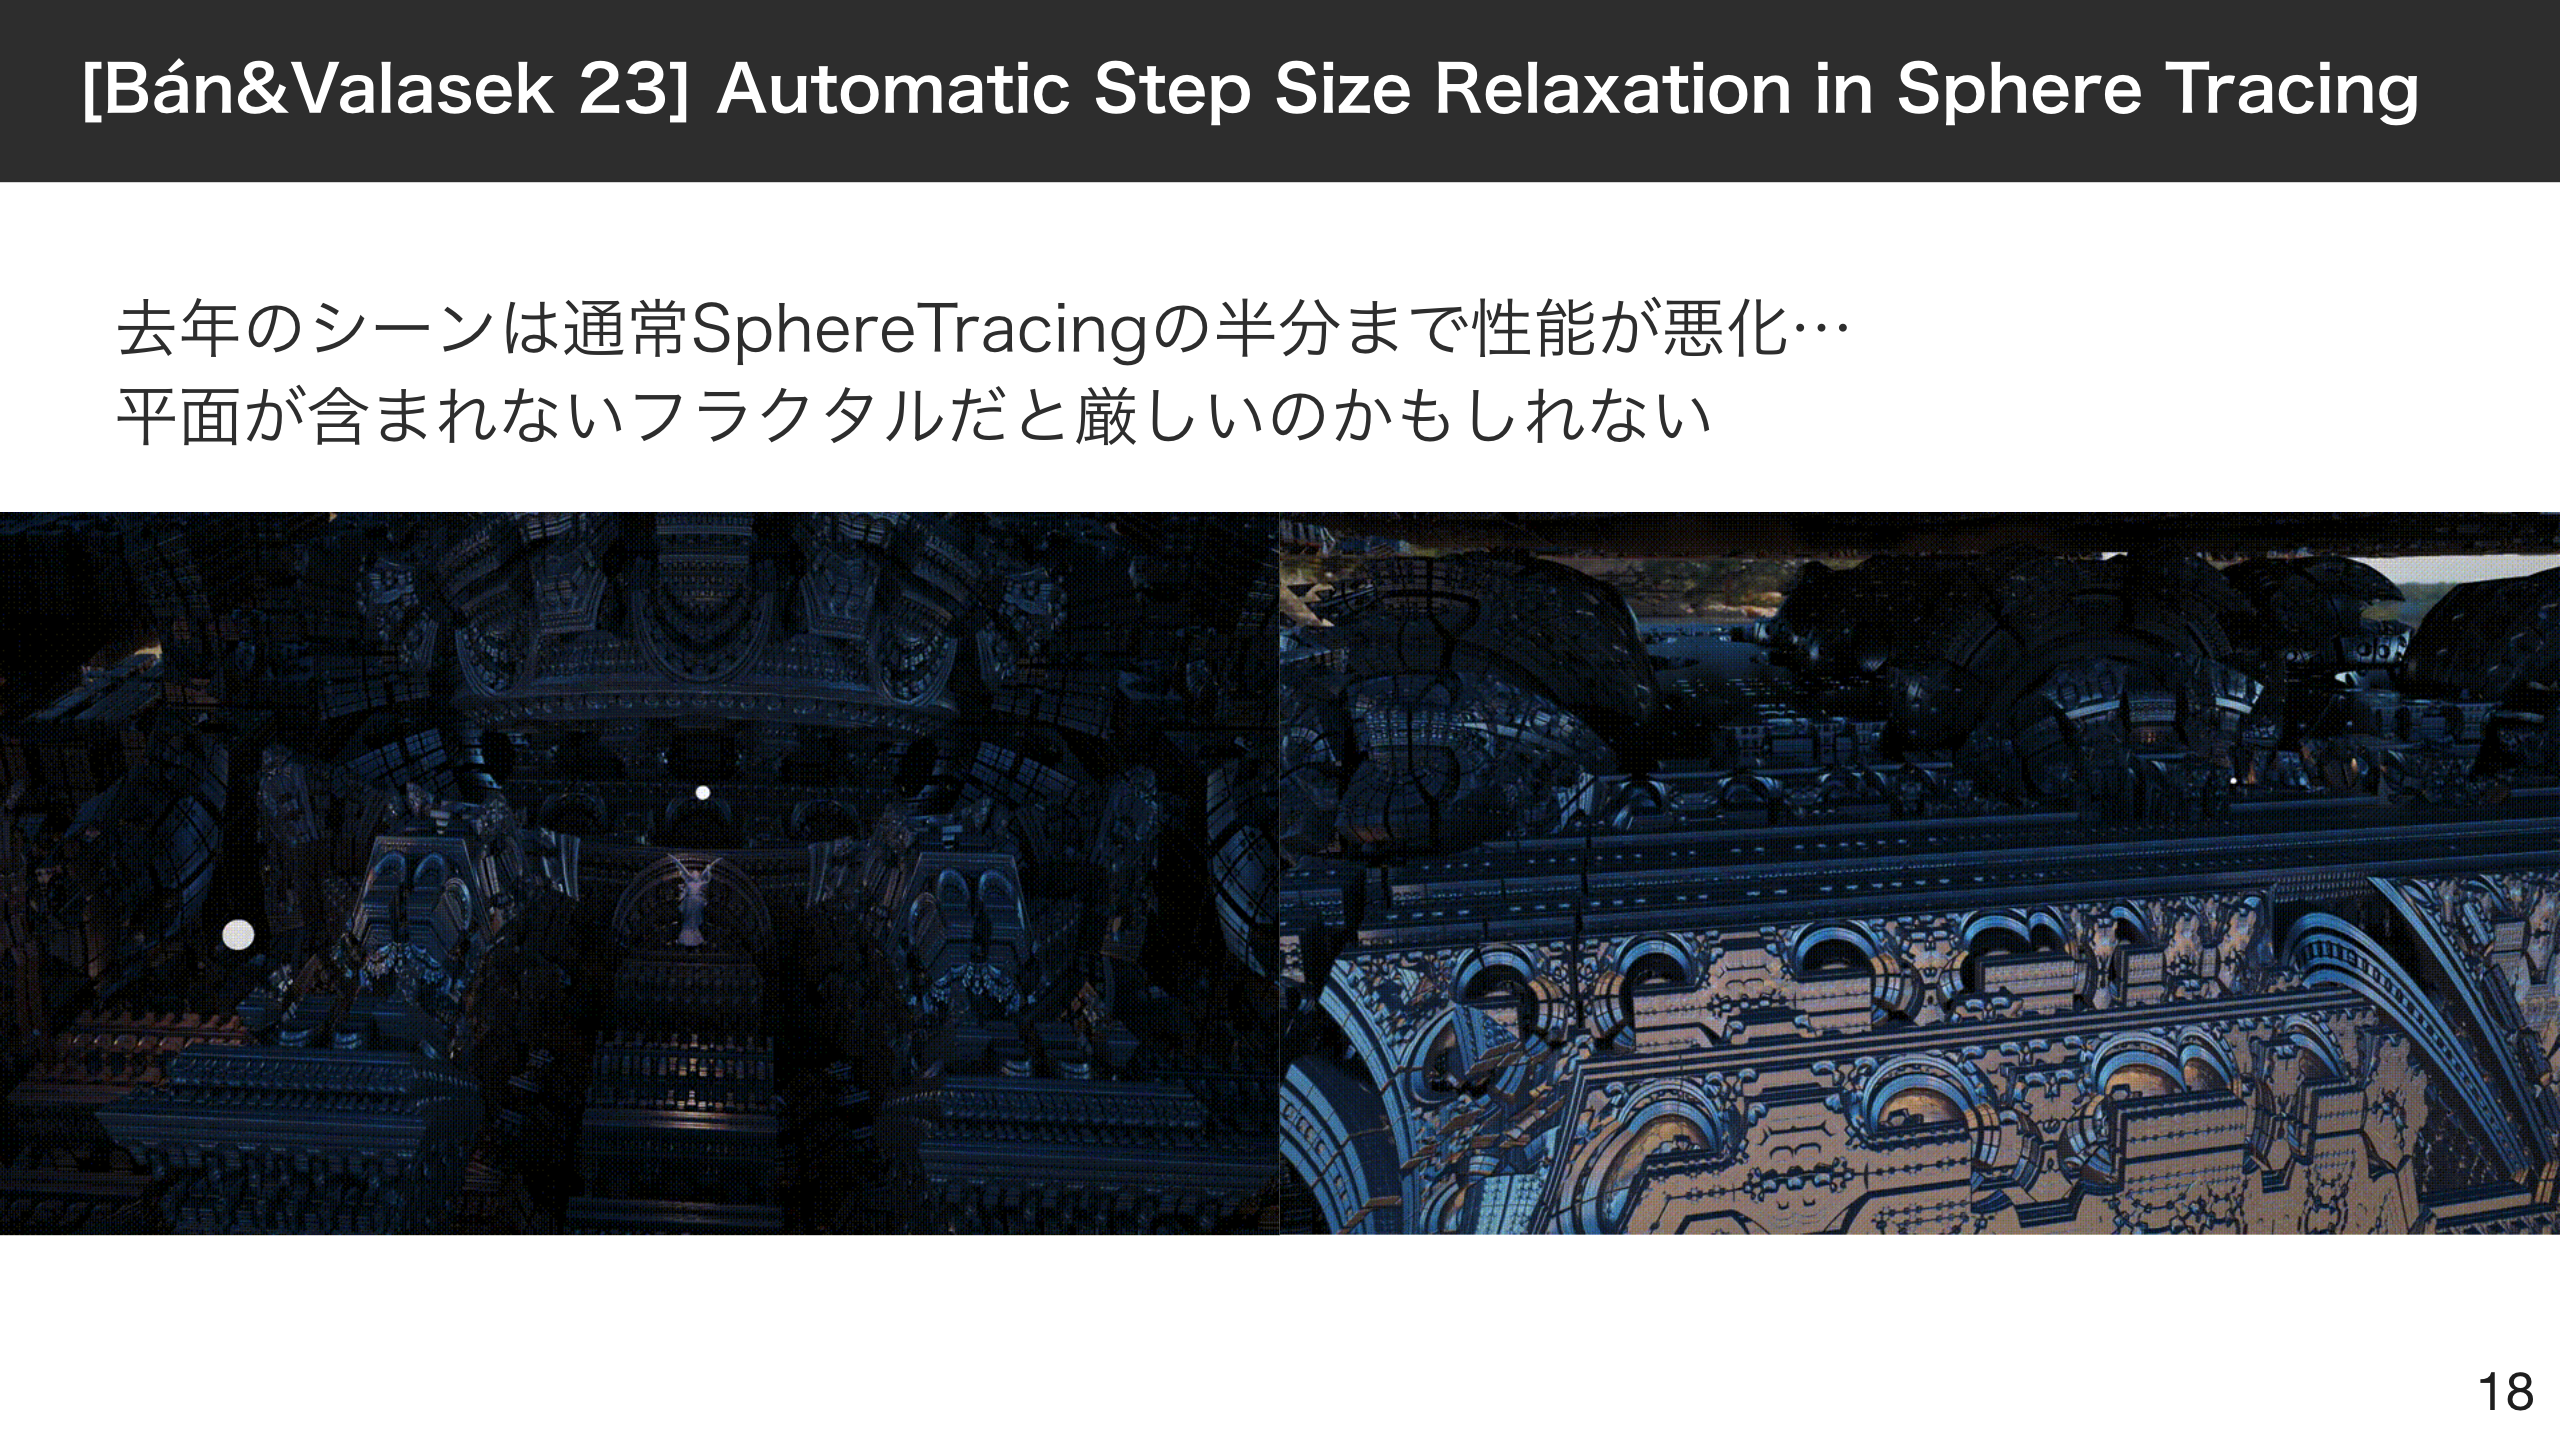 [Bán&Valasek 23] Automatic Step Size Relaxation in Sphere Tracingの結果 Mandelbox